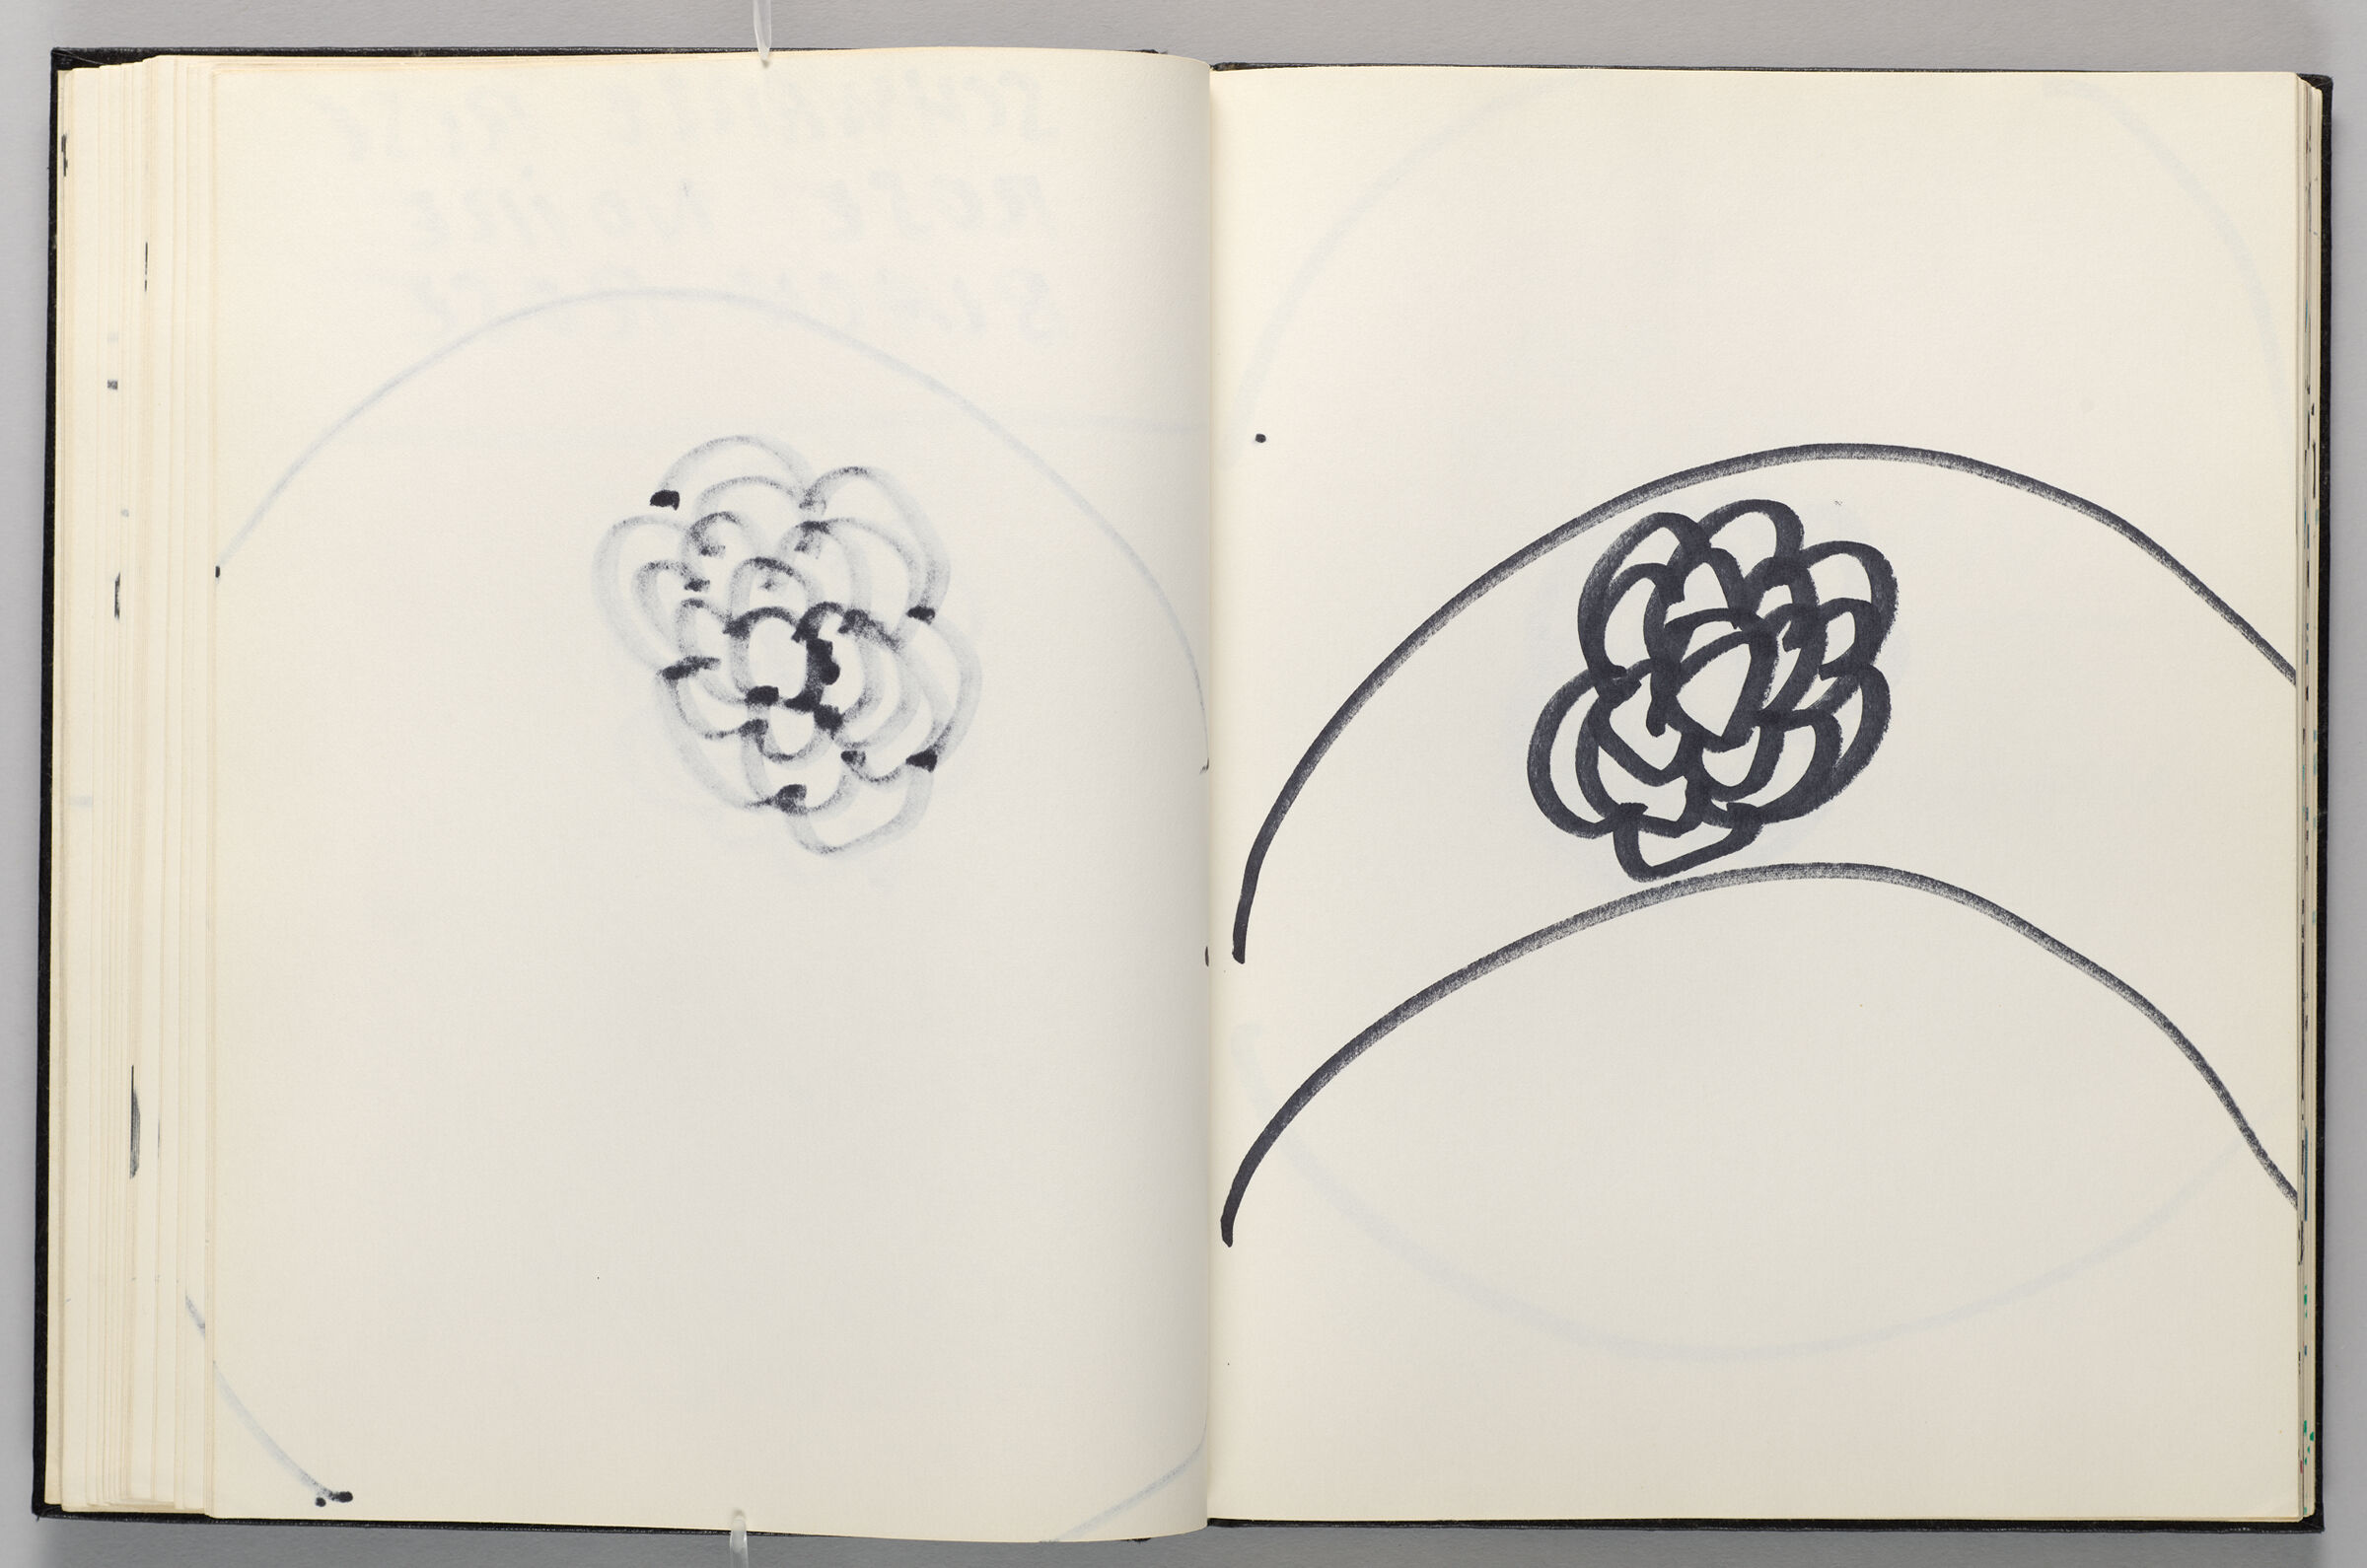 Untitled (Bleed-Through Of Previous Page, Left Page); Untitled (Porcelain Design, Right Page)